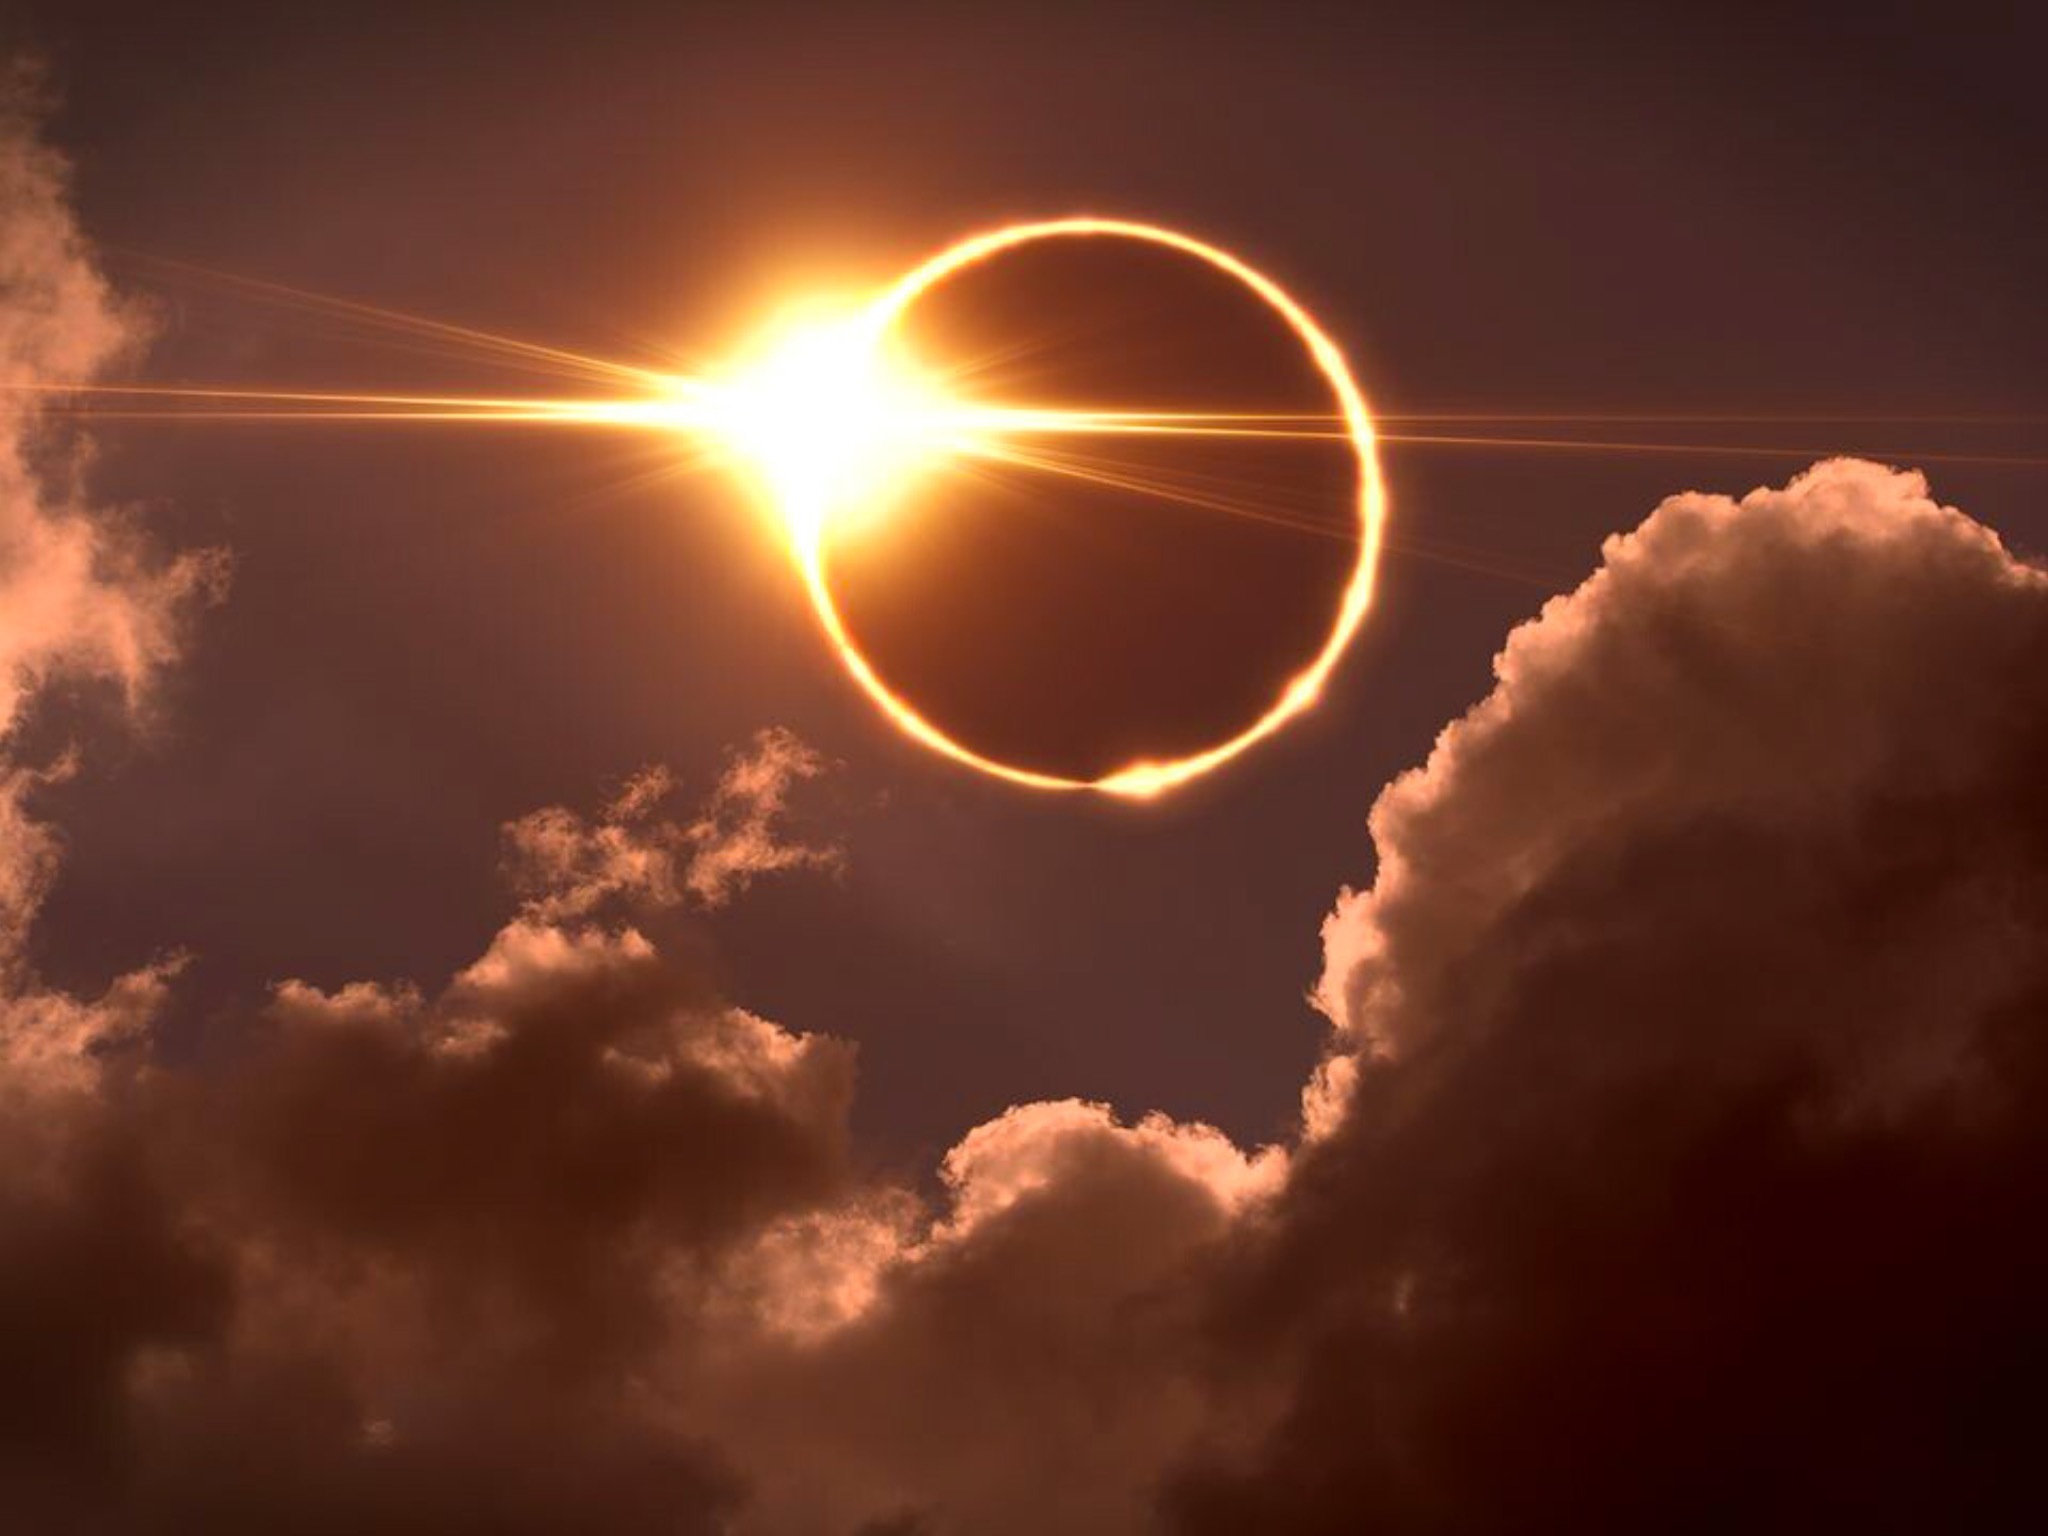 The phenomenon of the 'ring of fire' solar eclipse seen in a number of  regions in Lhokseumawe. The 